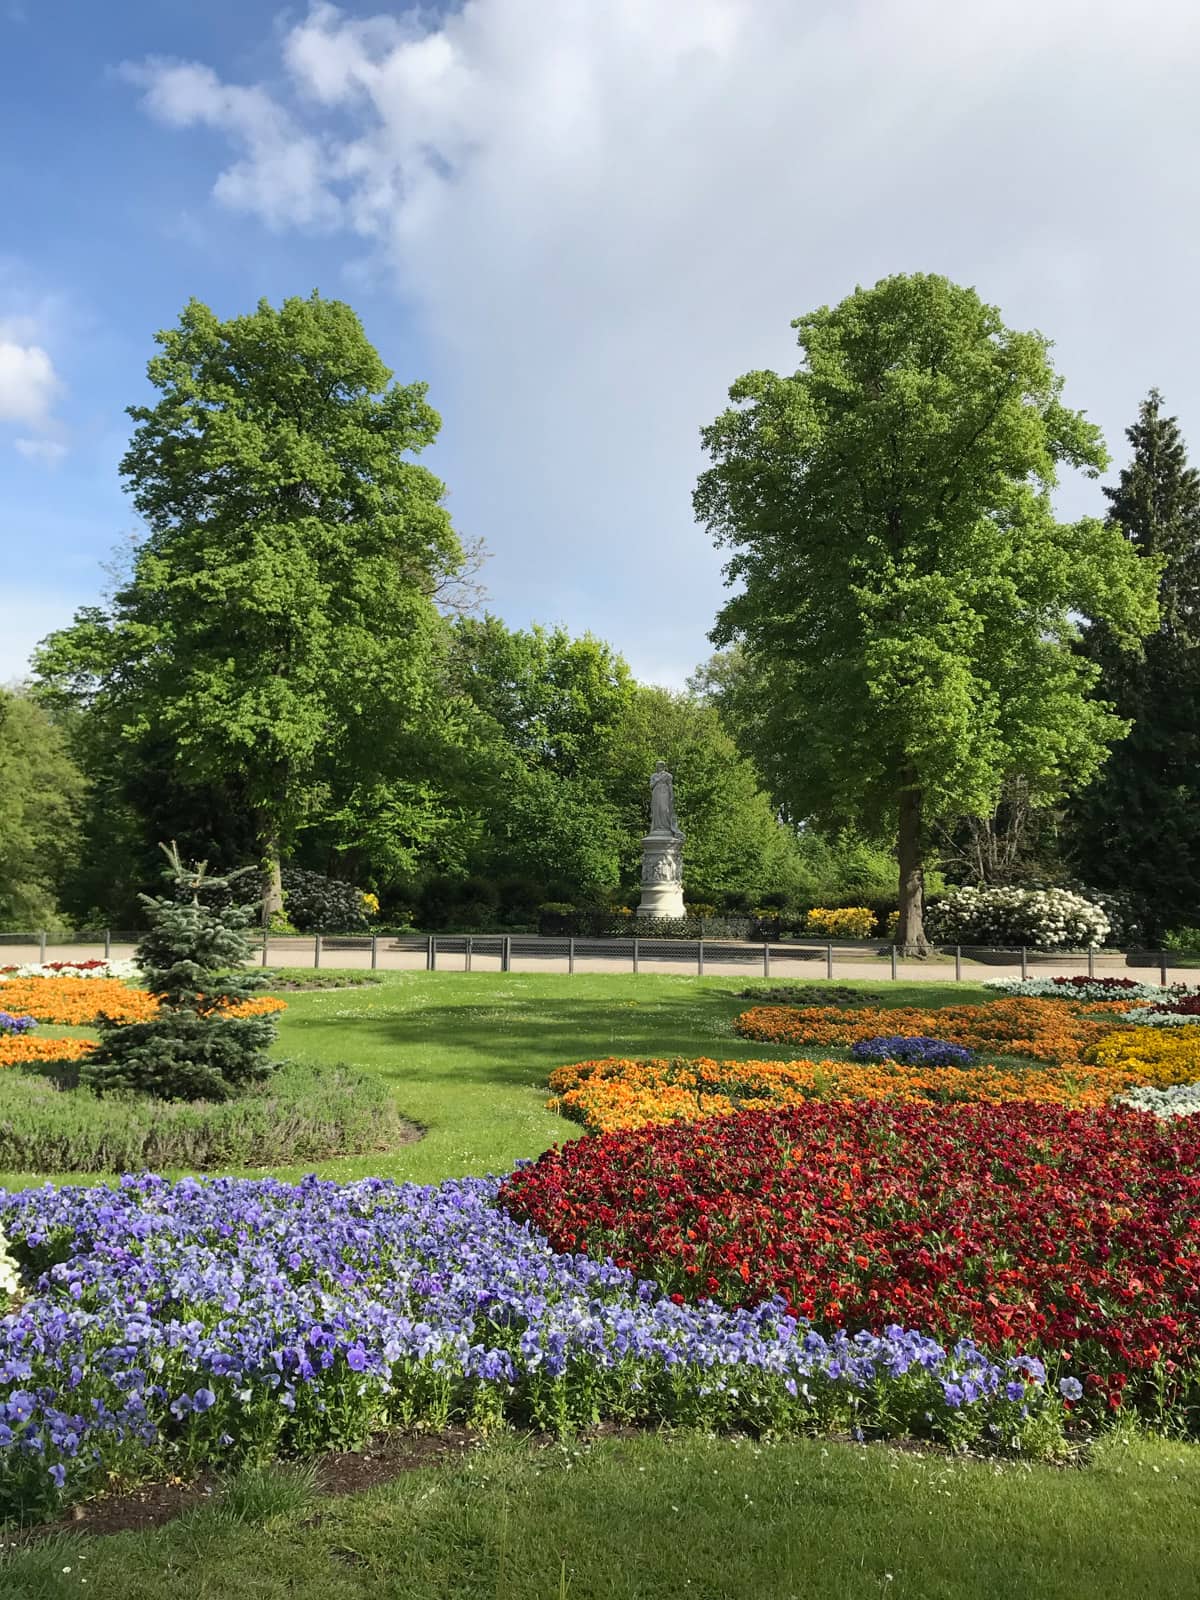 The inside of a very green park with colourful flowers in the foreground and big trees in the background